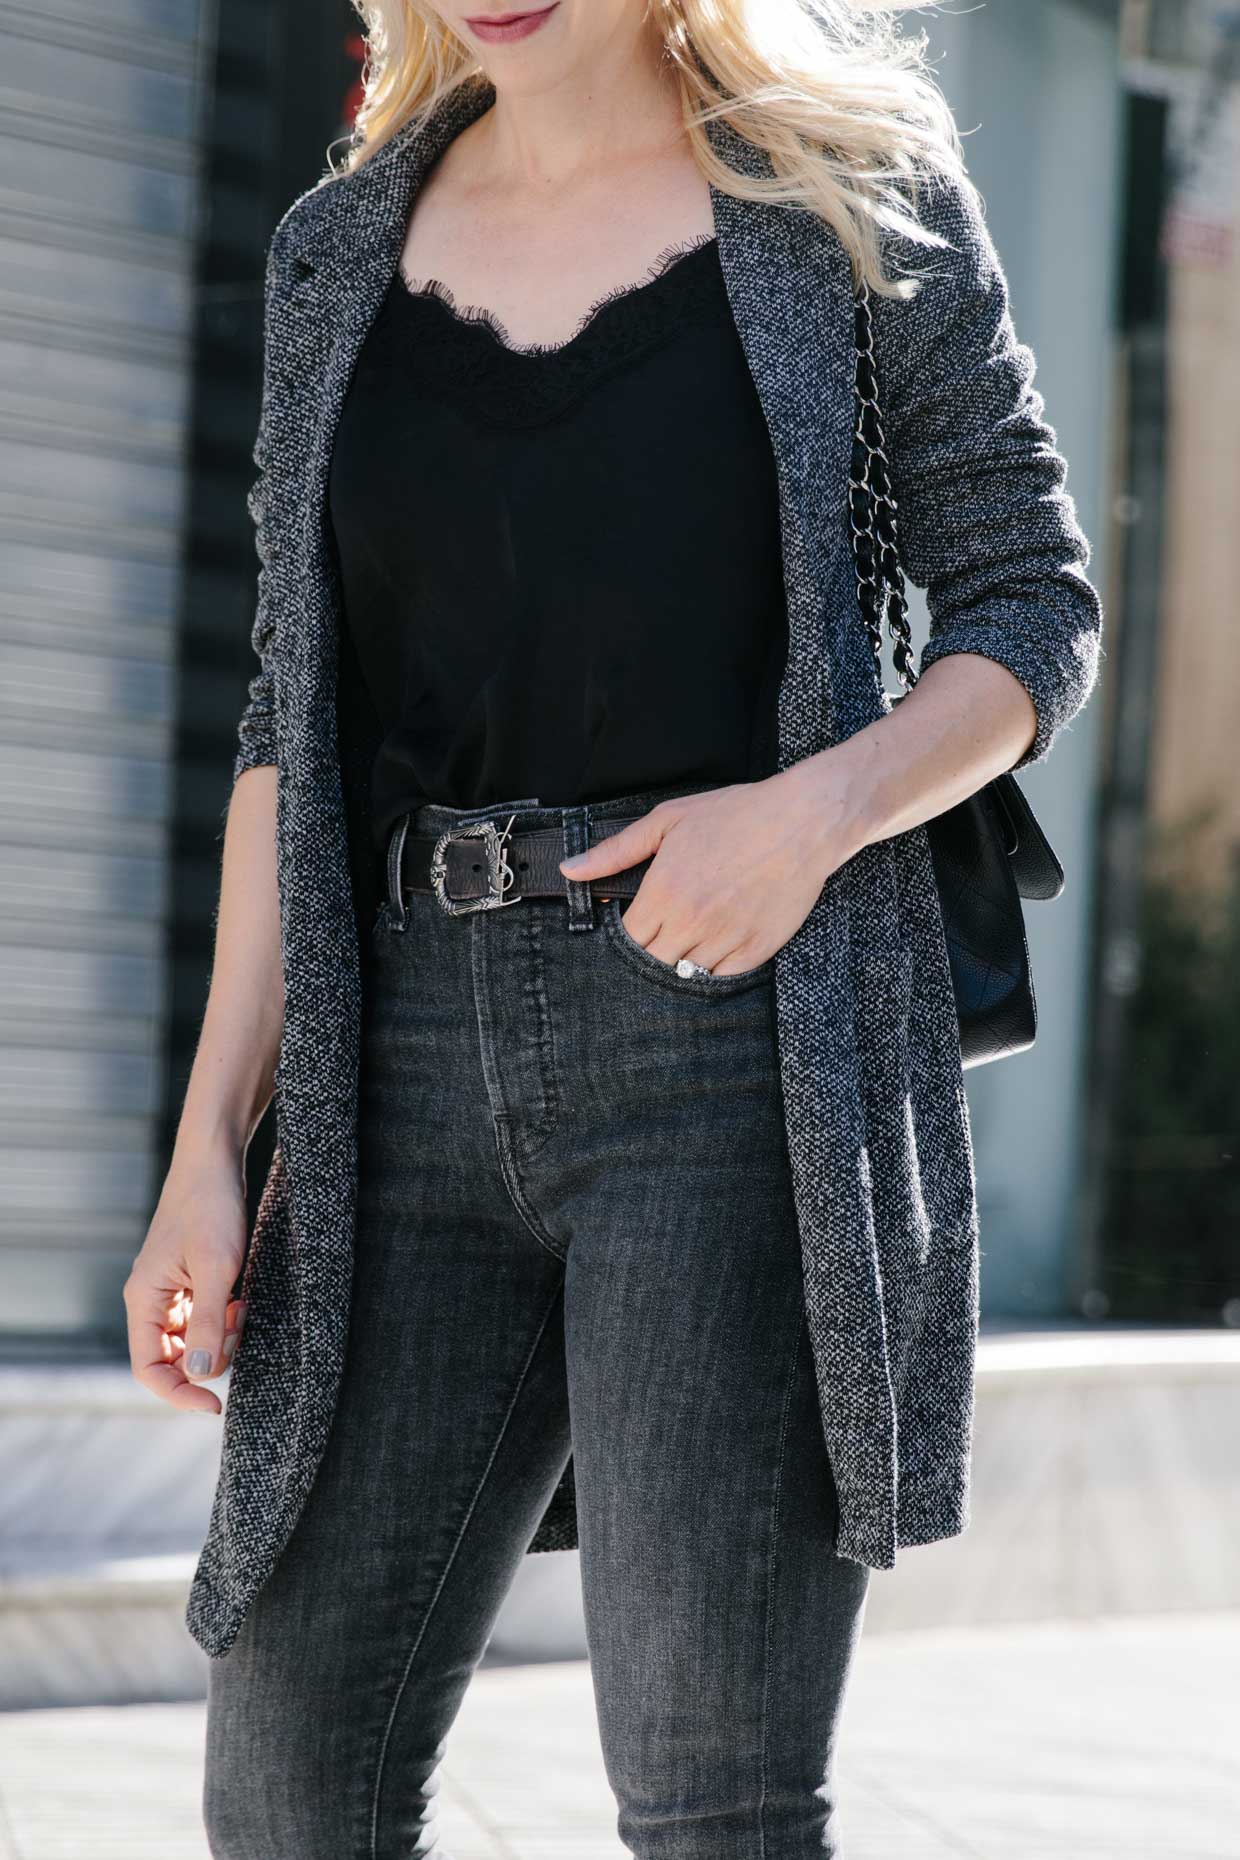 Chic fall outfit idea with long black blazer, lace camisole, black